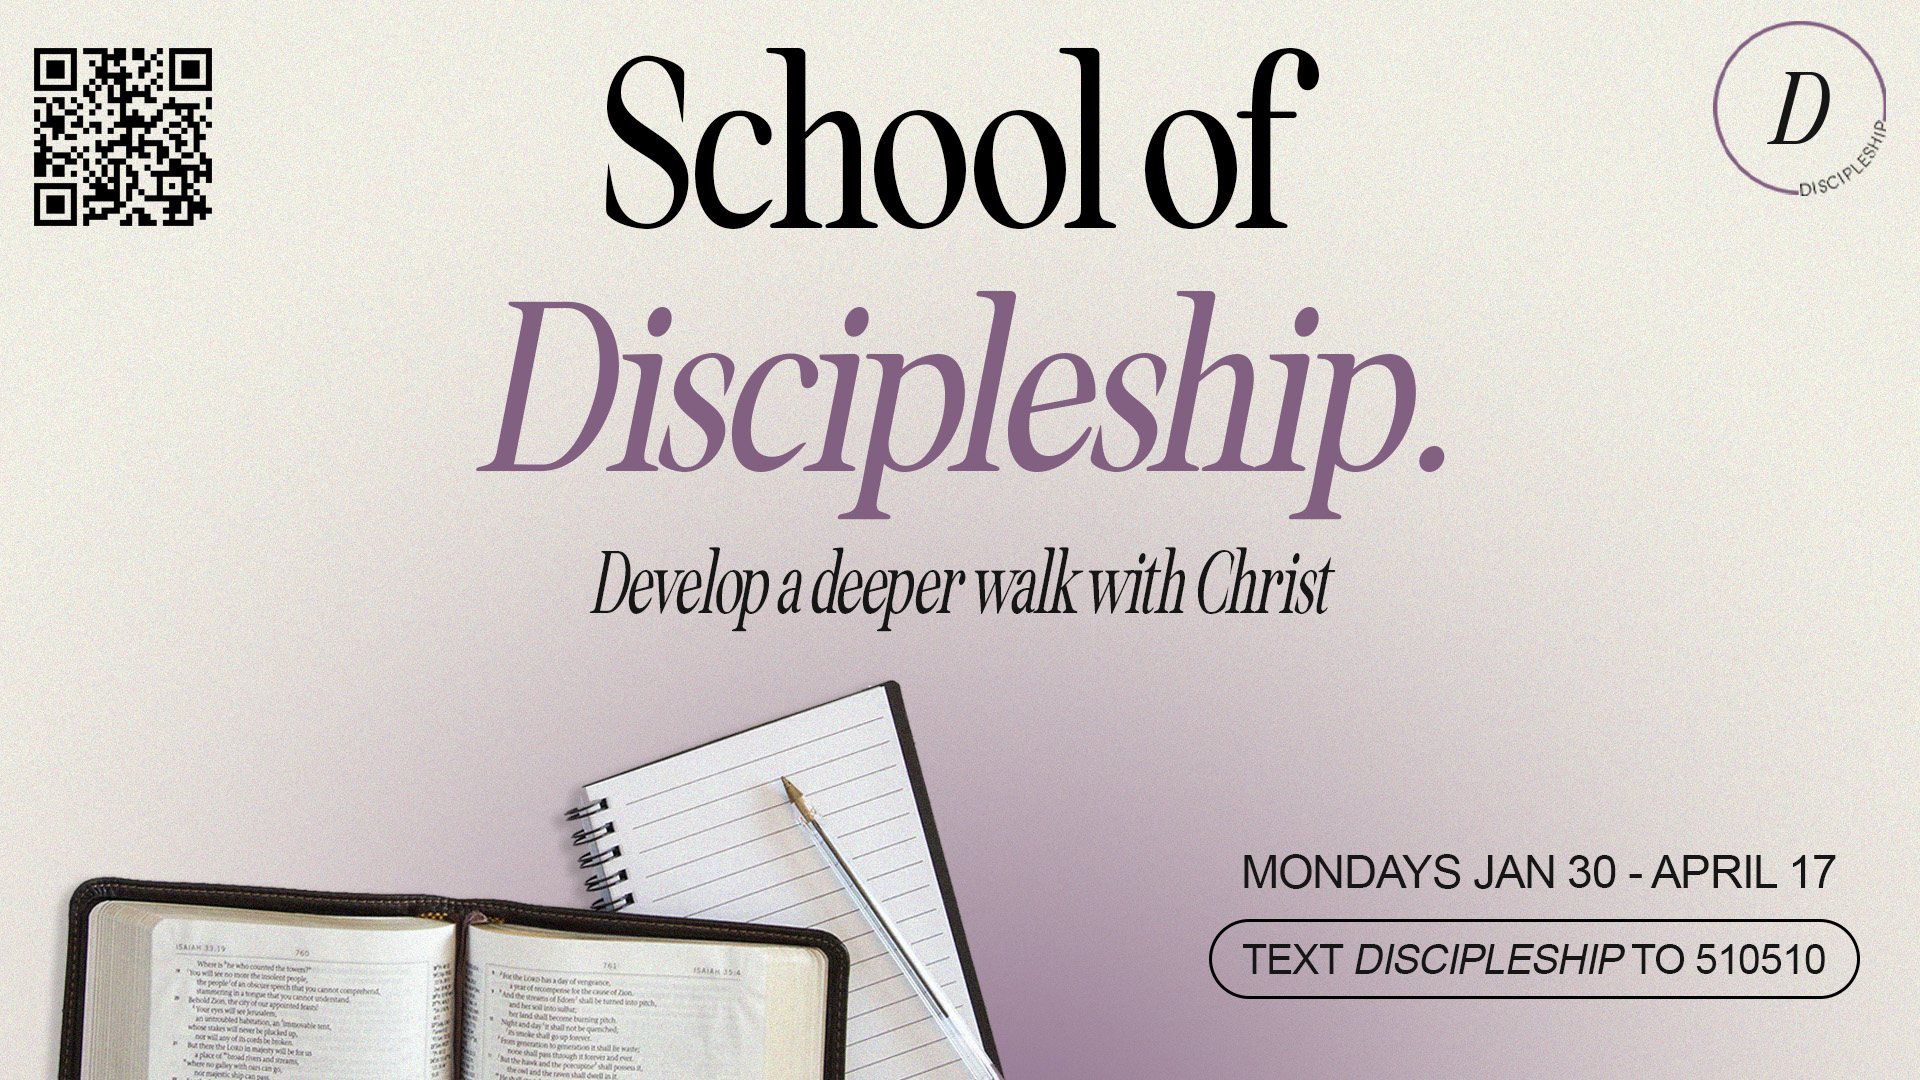 School of Discipleship - Spring Session at the Midtown campus